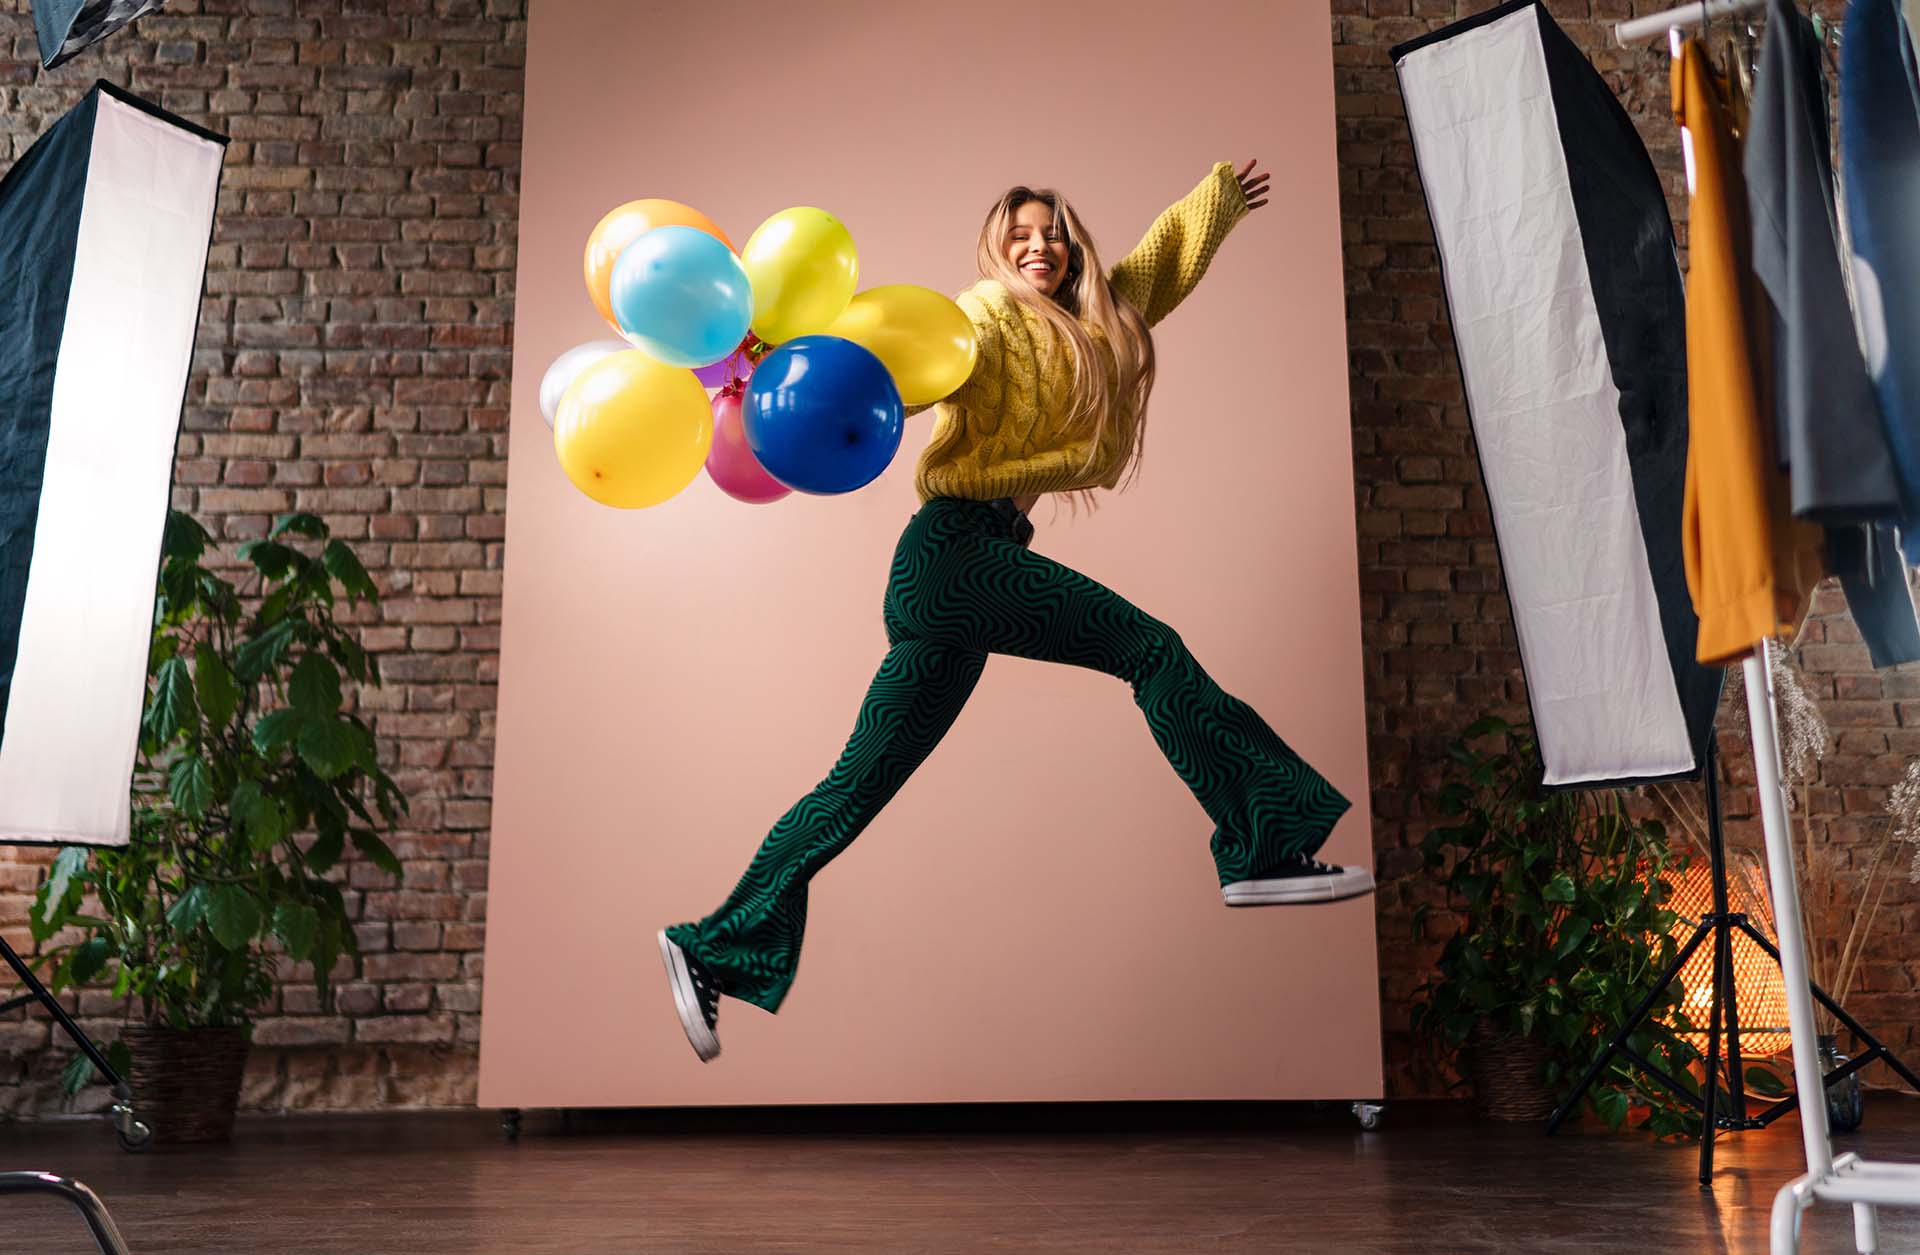 Product Photography Tips: Focus of a photoshoot, lady leaping with balloons wearing a bright yellow jumper, includes backdrop and light boxes.